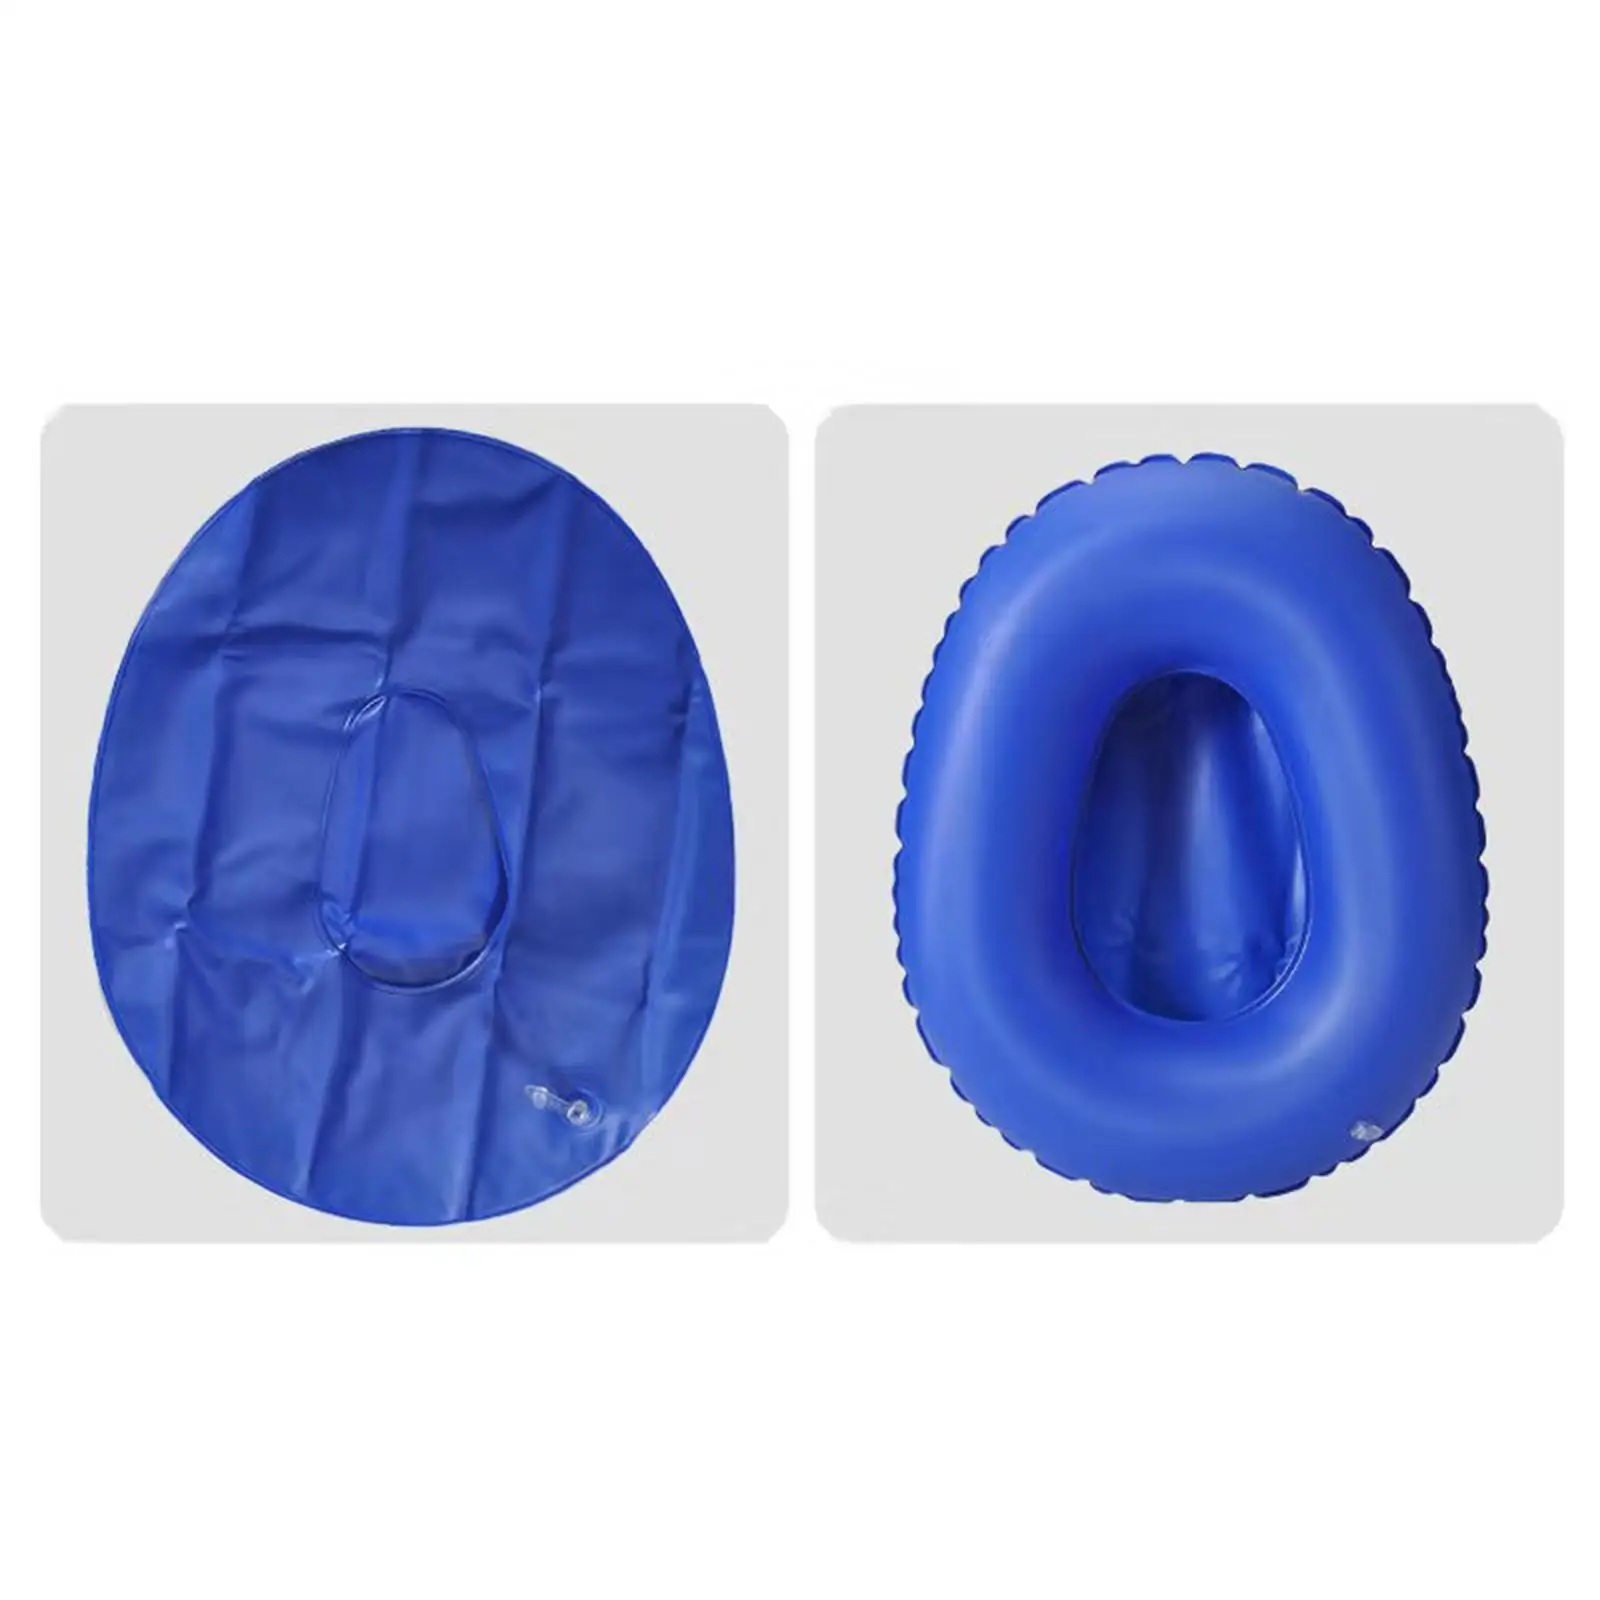 Inflatable Bedpans For Elderly Easy To Clean Soft Seat Stool For Bedridden Elderly Home Disabled